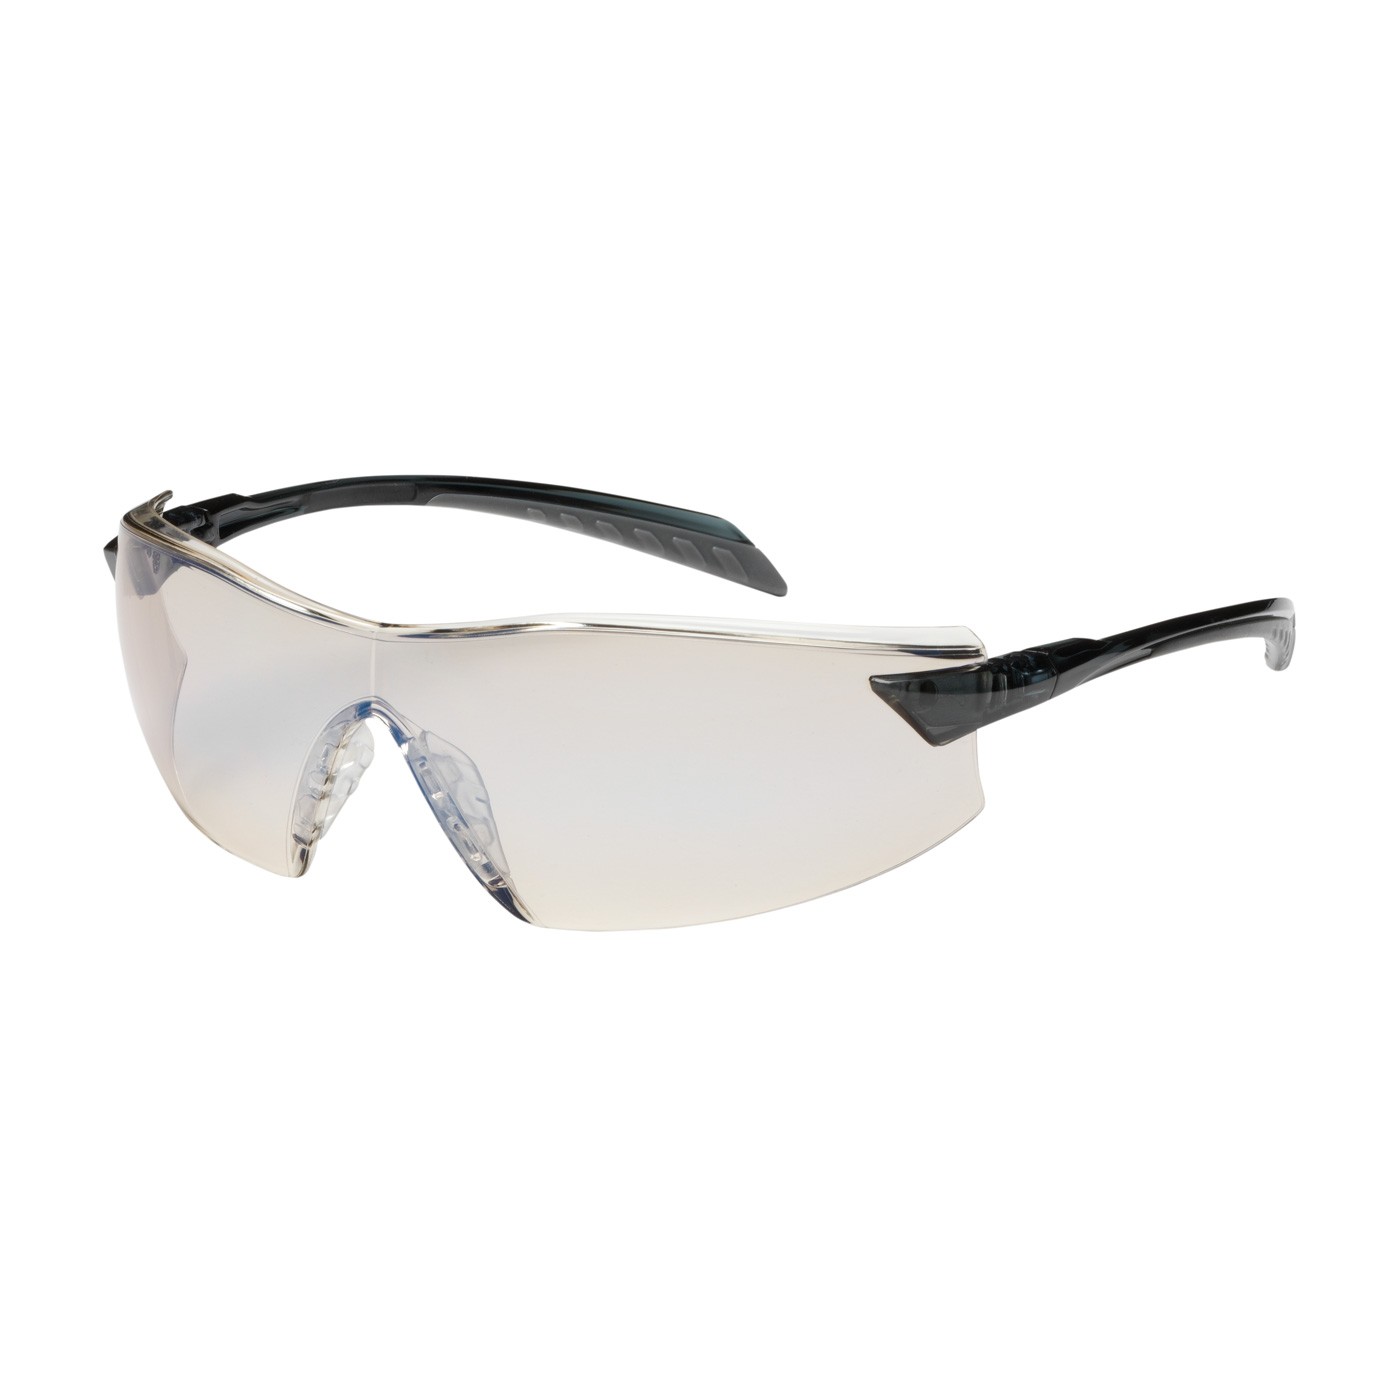 Radar™ Rimless Safety Glasses with Gray Temple, I/O Blue Lens and Anti-Scratch / Anti-Fog Coating  (#250-45-0226)